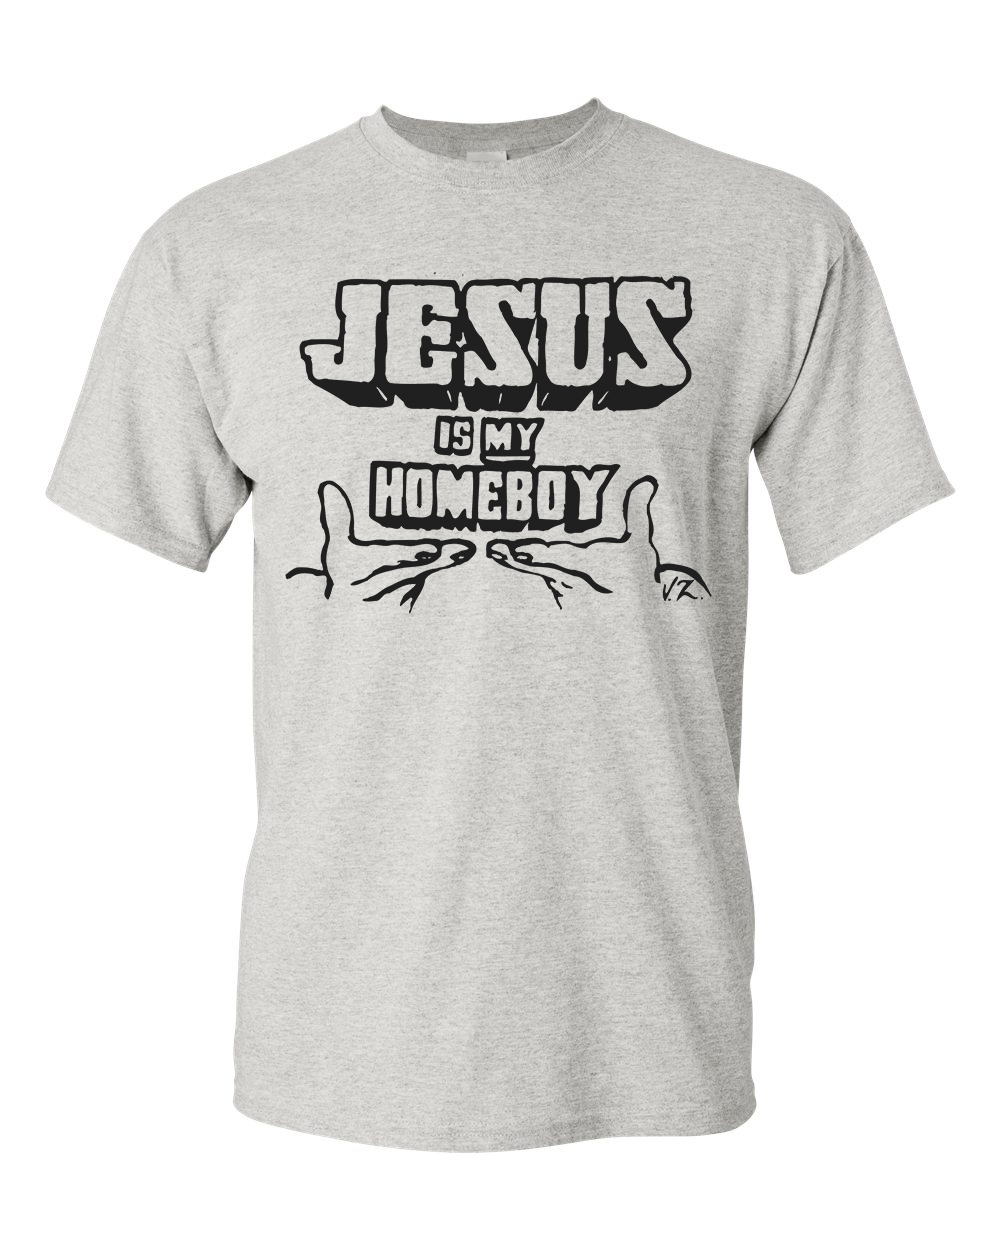 Jesus Is My Homeboy Original Only Official Merchandise and artwork